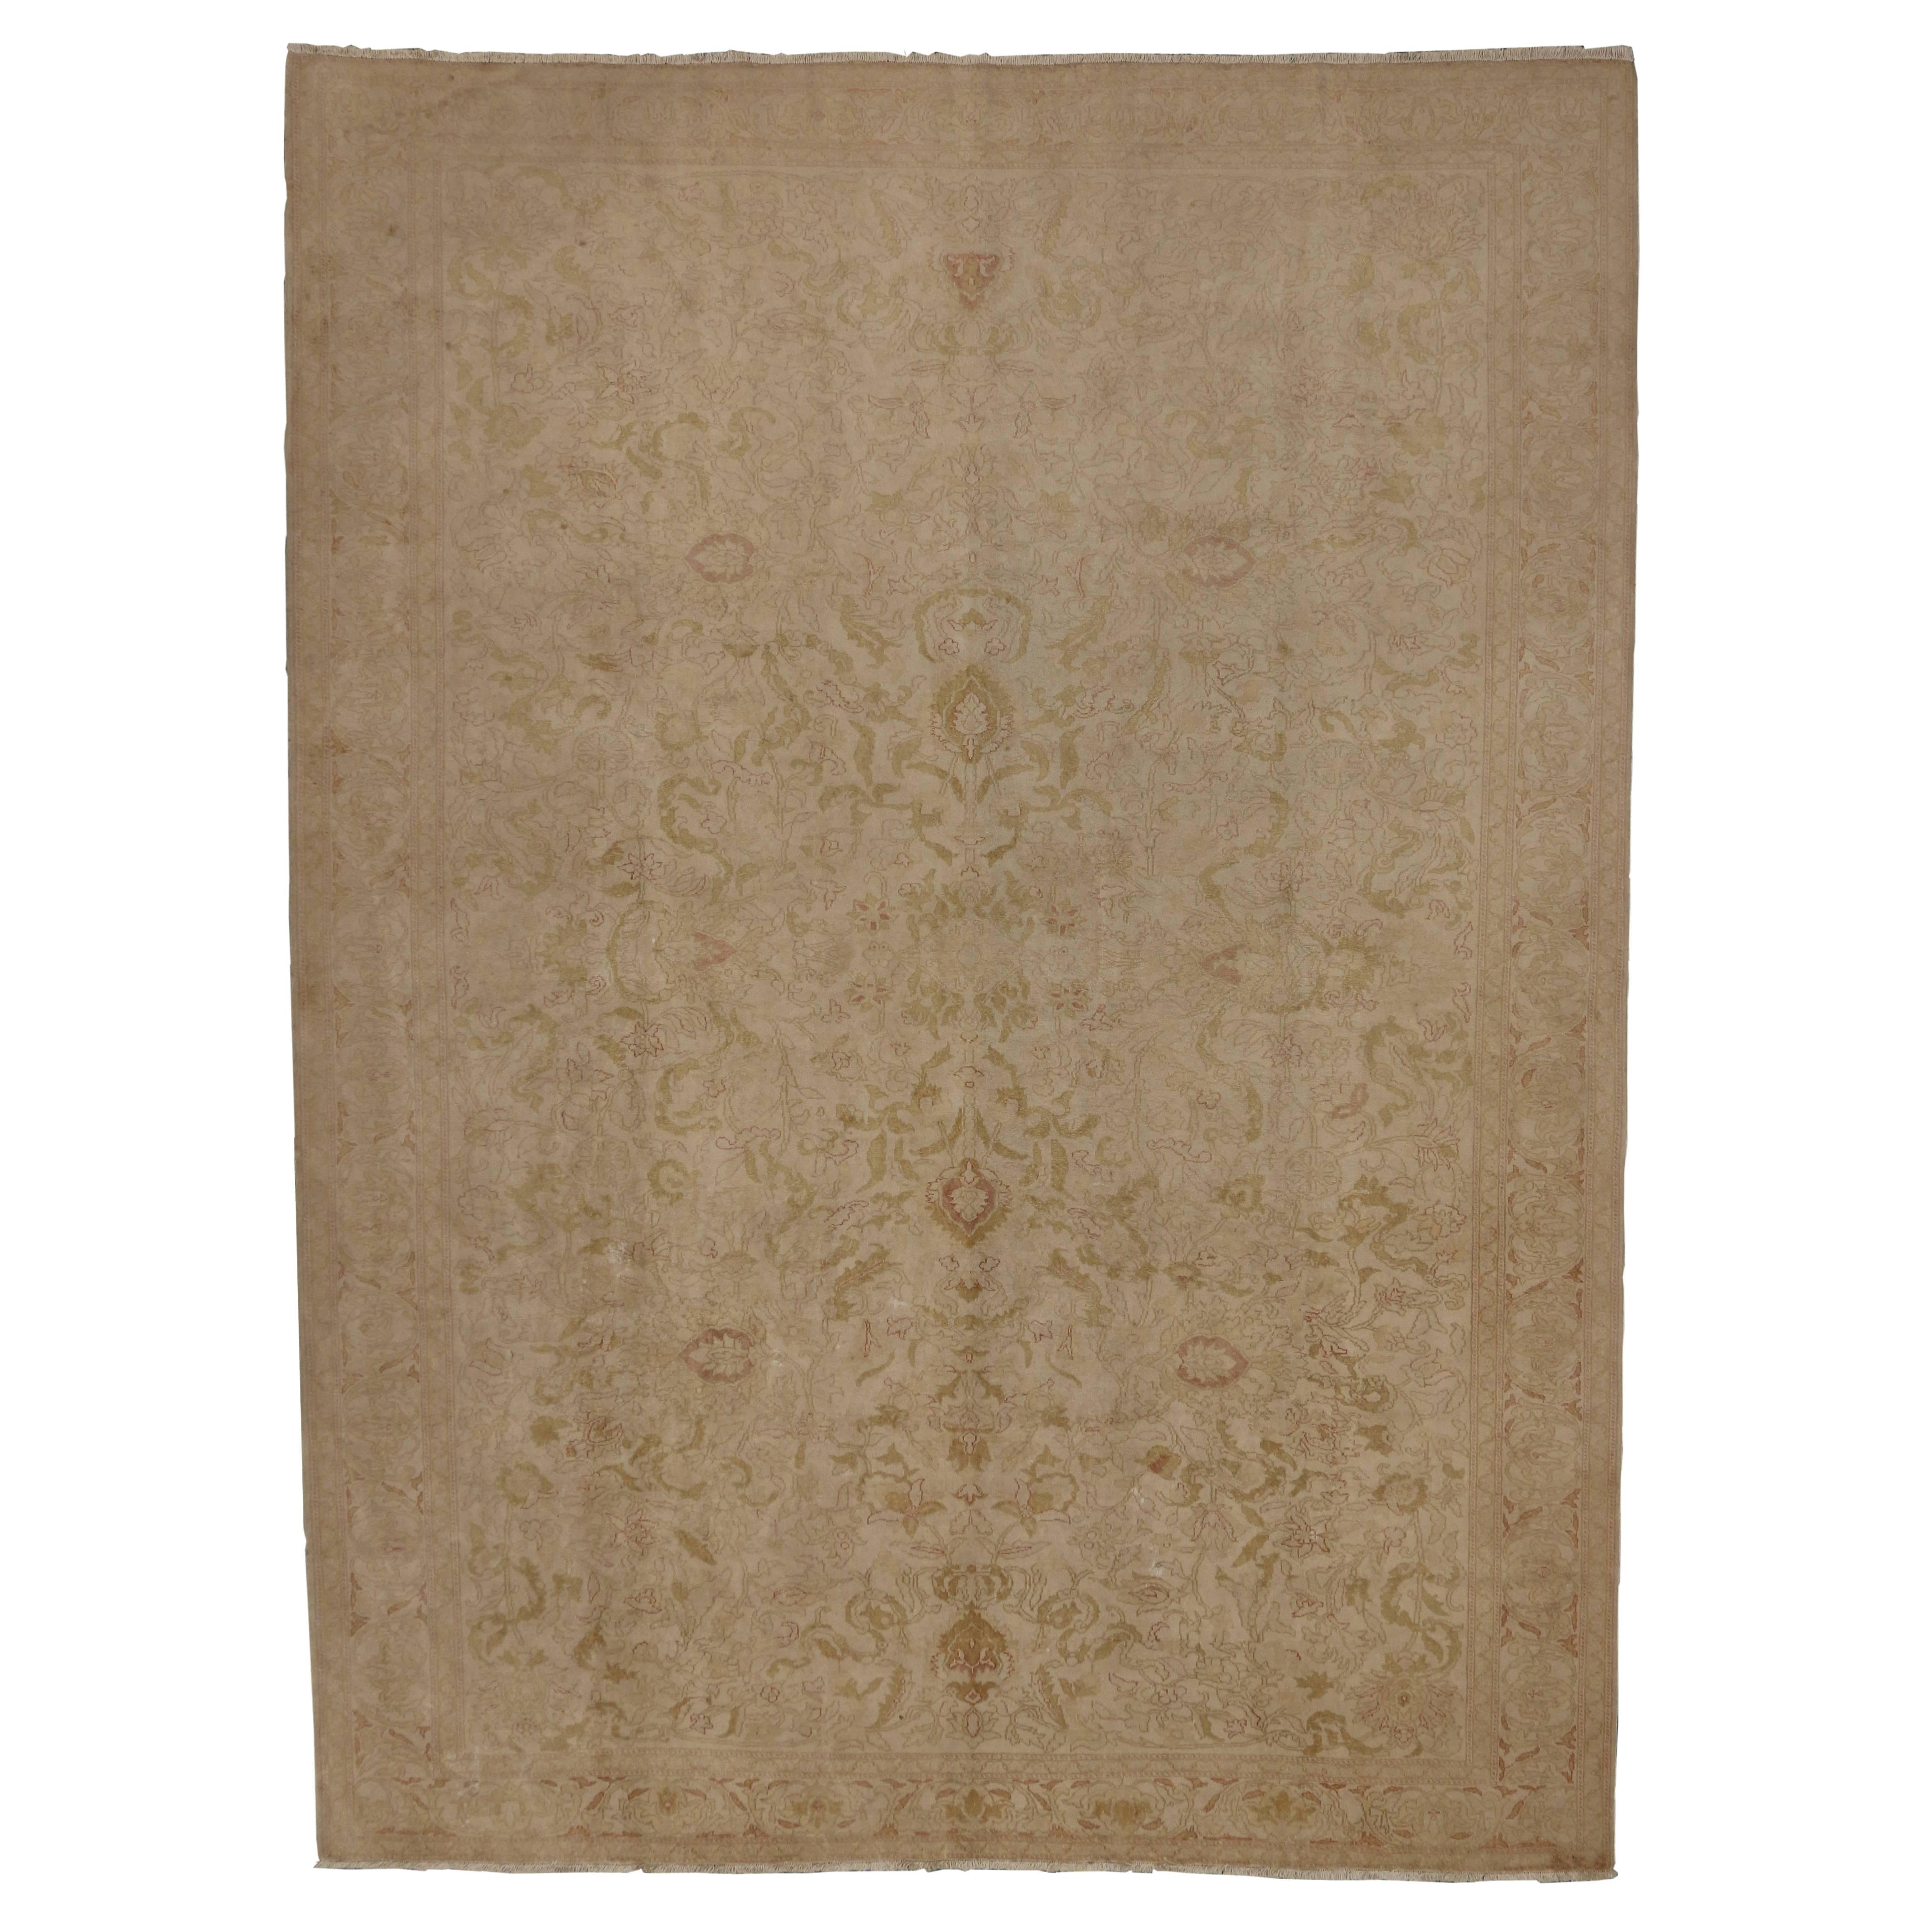 ​71910 Antique Turkish Oushak Rug with Minimalist Style in Soft Muted Colors 09'02 X 12'07.​​ Soft, bespoke vibes meet ancient traditions in this hand-knotted cotton antique Turkish Oushak rug. Emanating grace and tranquility while rich with woven